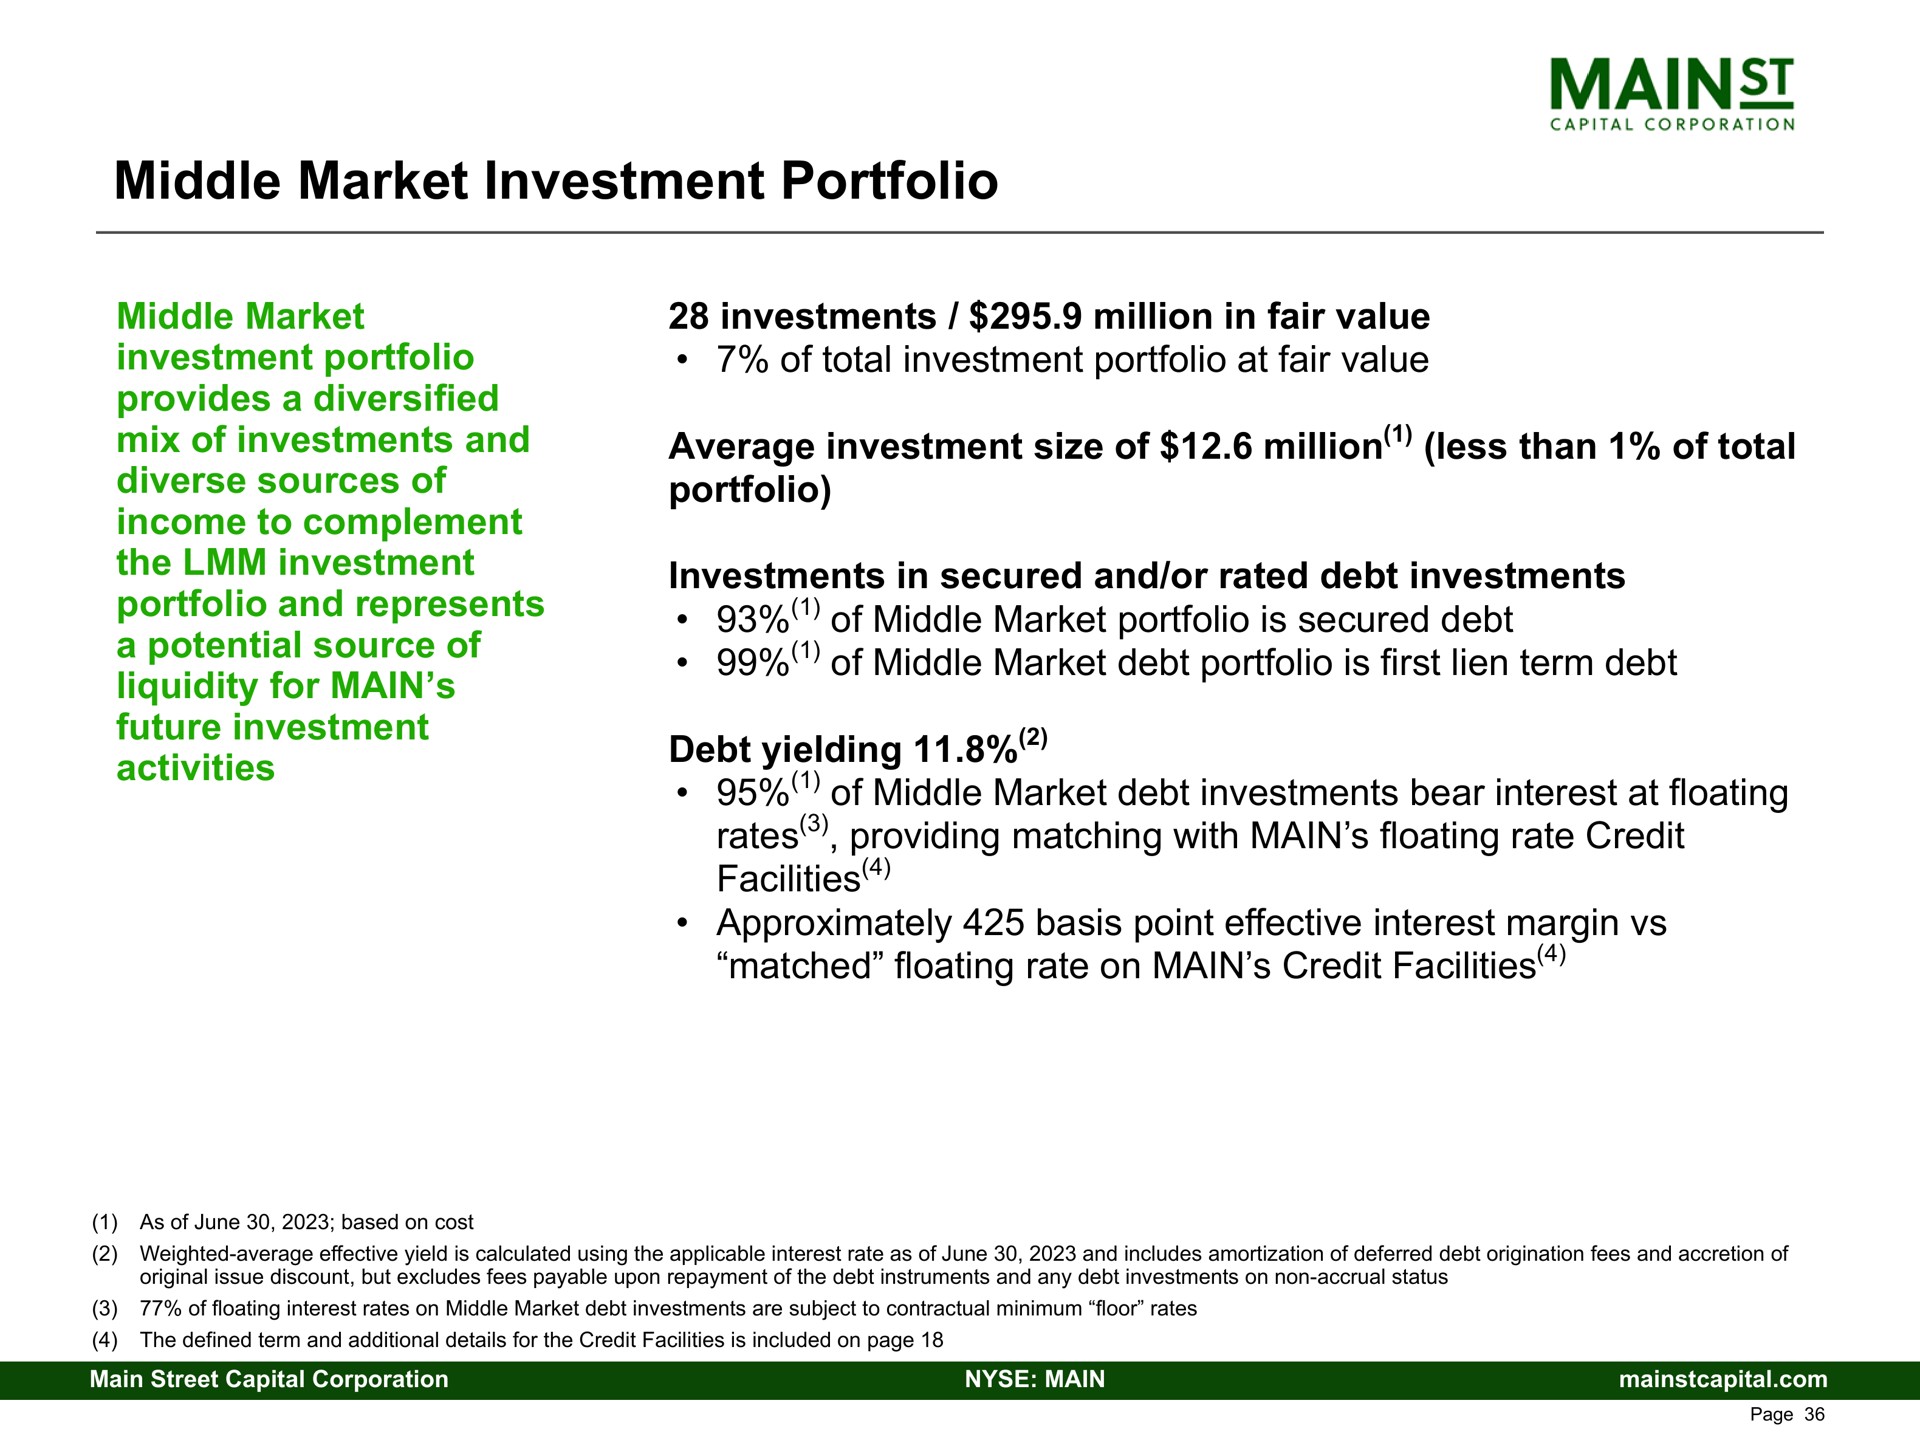 middle market investment portfolio middle market investment portfolio provides a diversified mix of investments and diverse sources of income to complement the investment portfolio and represents a potential source of liquidity for main future investment activities investments million in fair value of total investment portfolio at fair value average investment size of million less than of total portfolio investments in secured and or rated debt investments of middle market portfolio is secured debt of middle market debt portfolio is first lien term debt debt yielding of middle market debt investments bear interest at floating rates providing matching with main floating rate credit facilities approximately basis point effective interest margin matched floating rate on main credit facilities | Main Street Capital